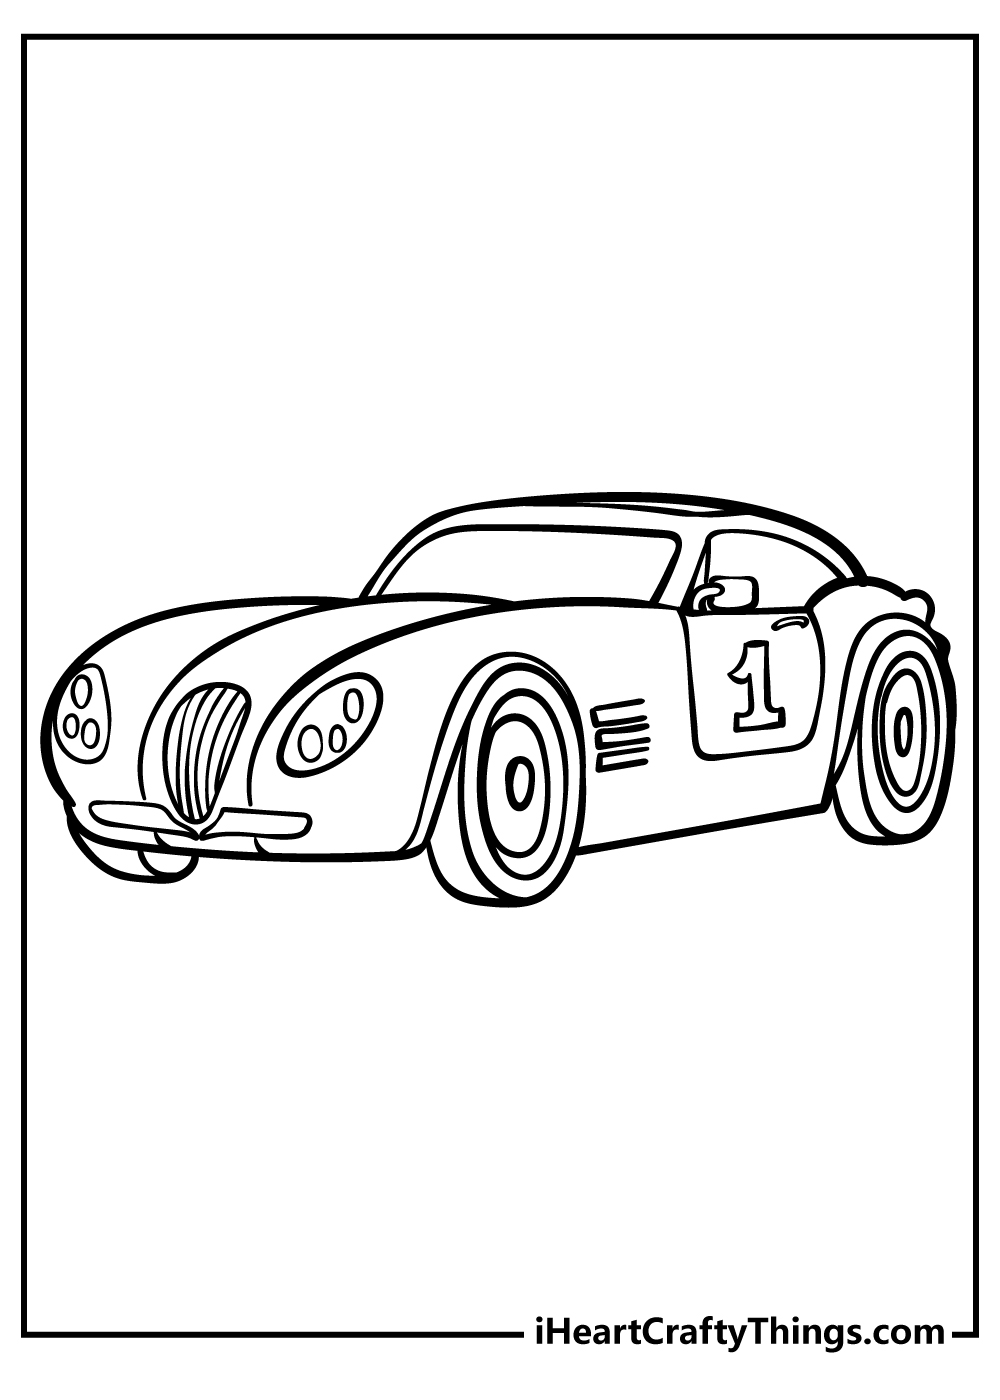 Race Car Coloring Pages free pdf download